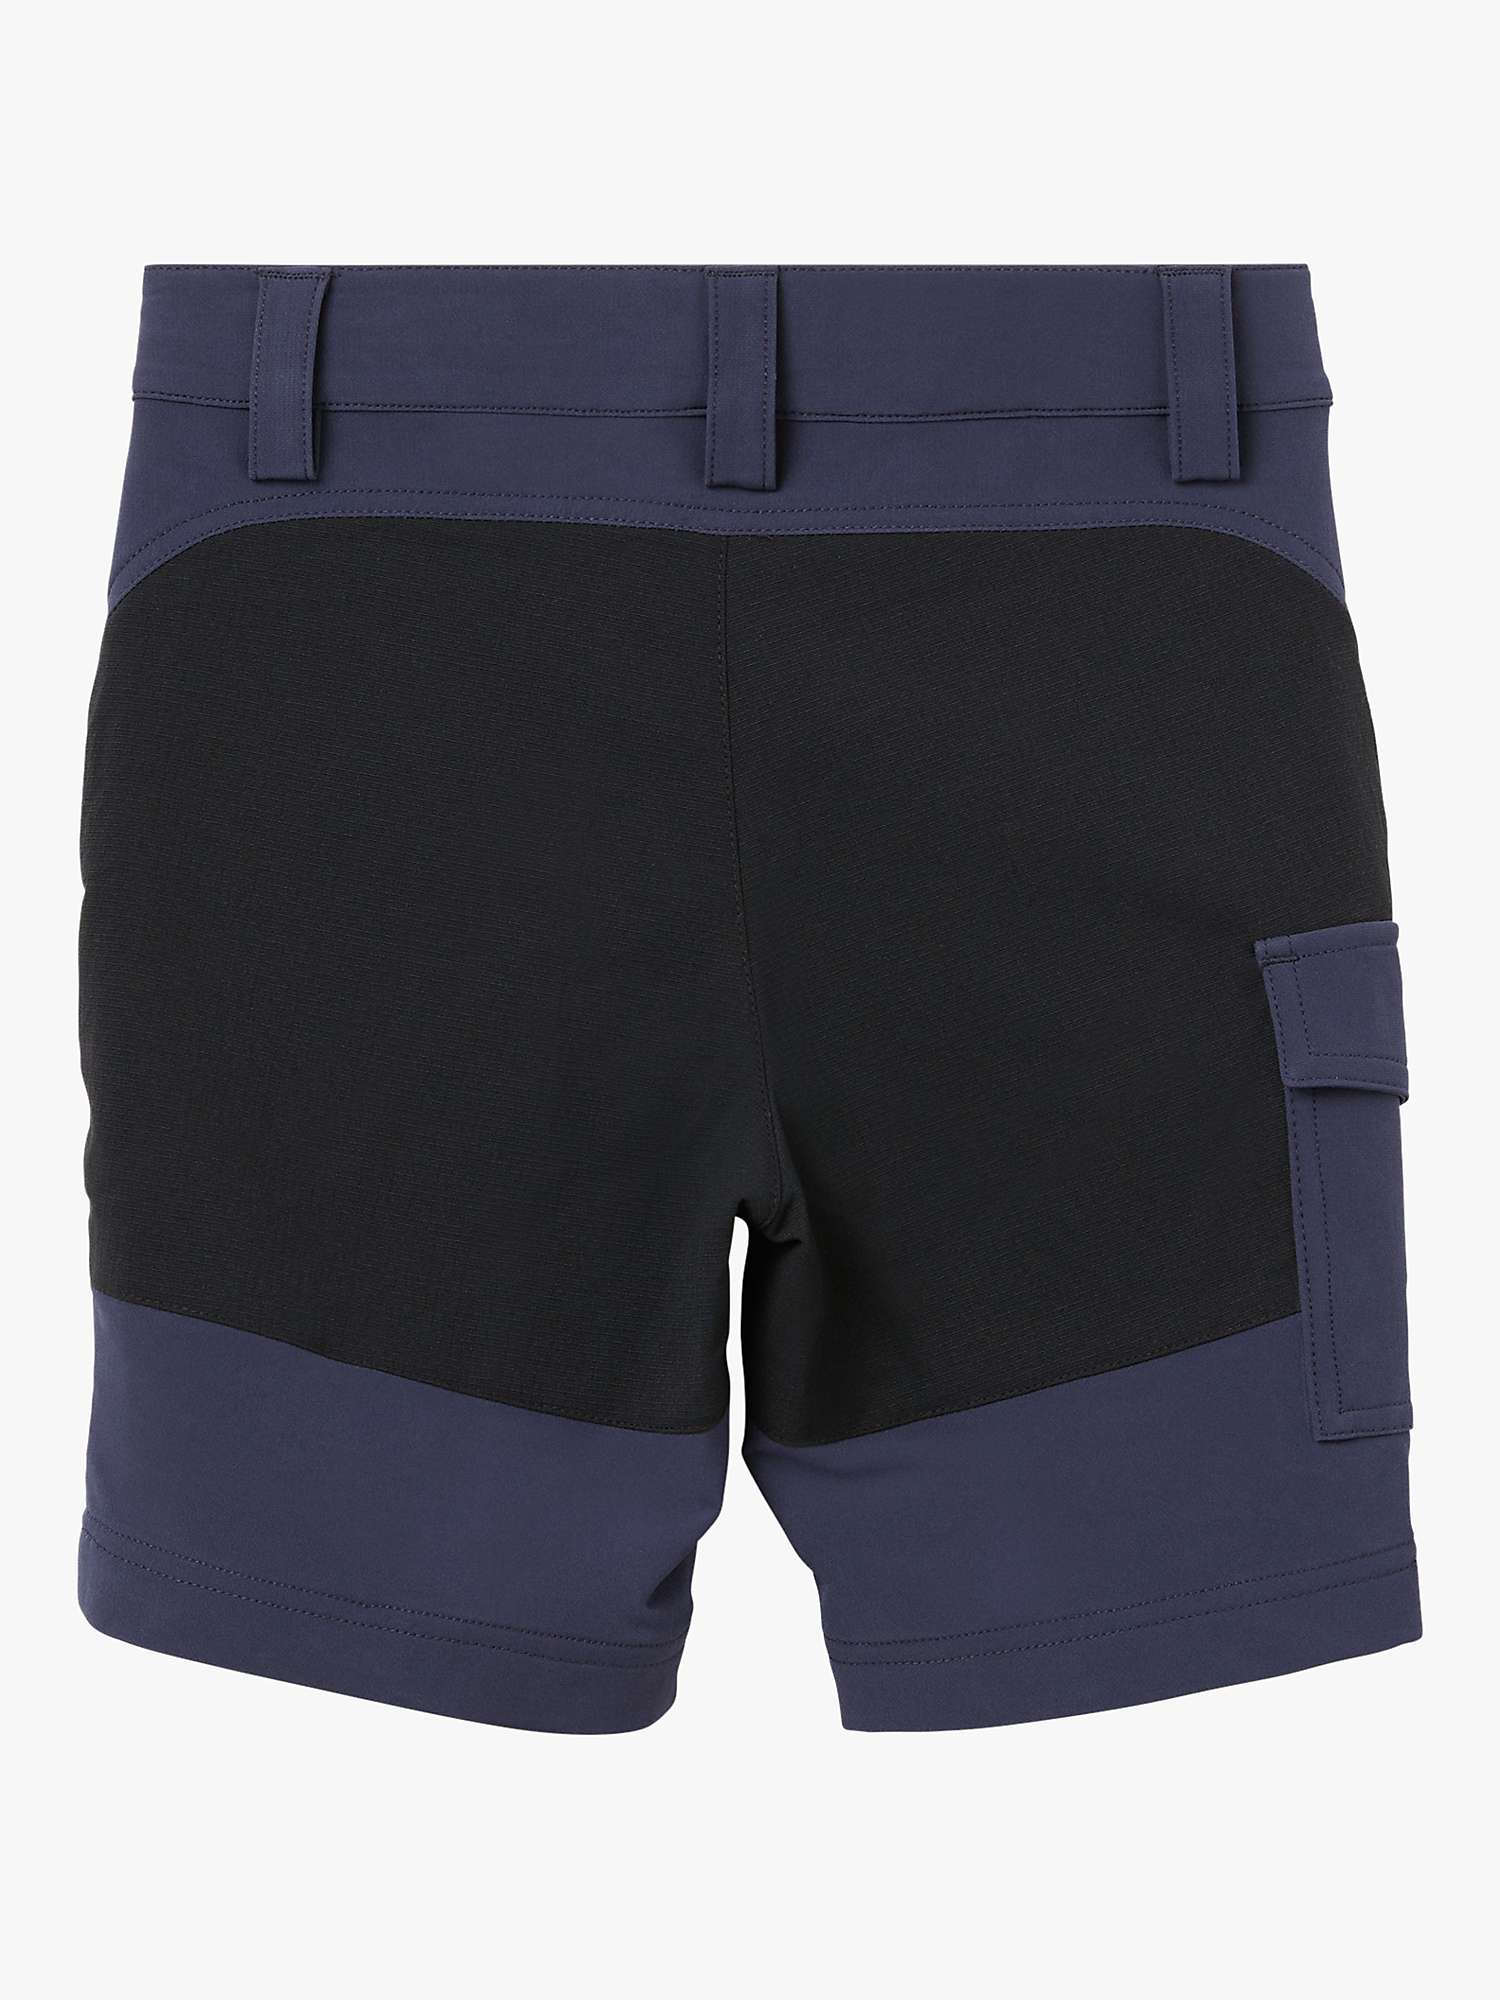 Buy Polarn O. Pyret Kids' Recycled Outerwear Shorts, Blue Online at johnlewis.com